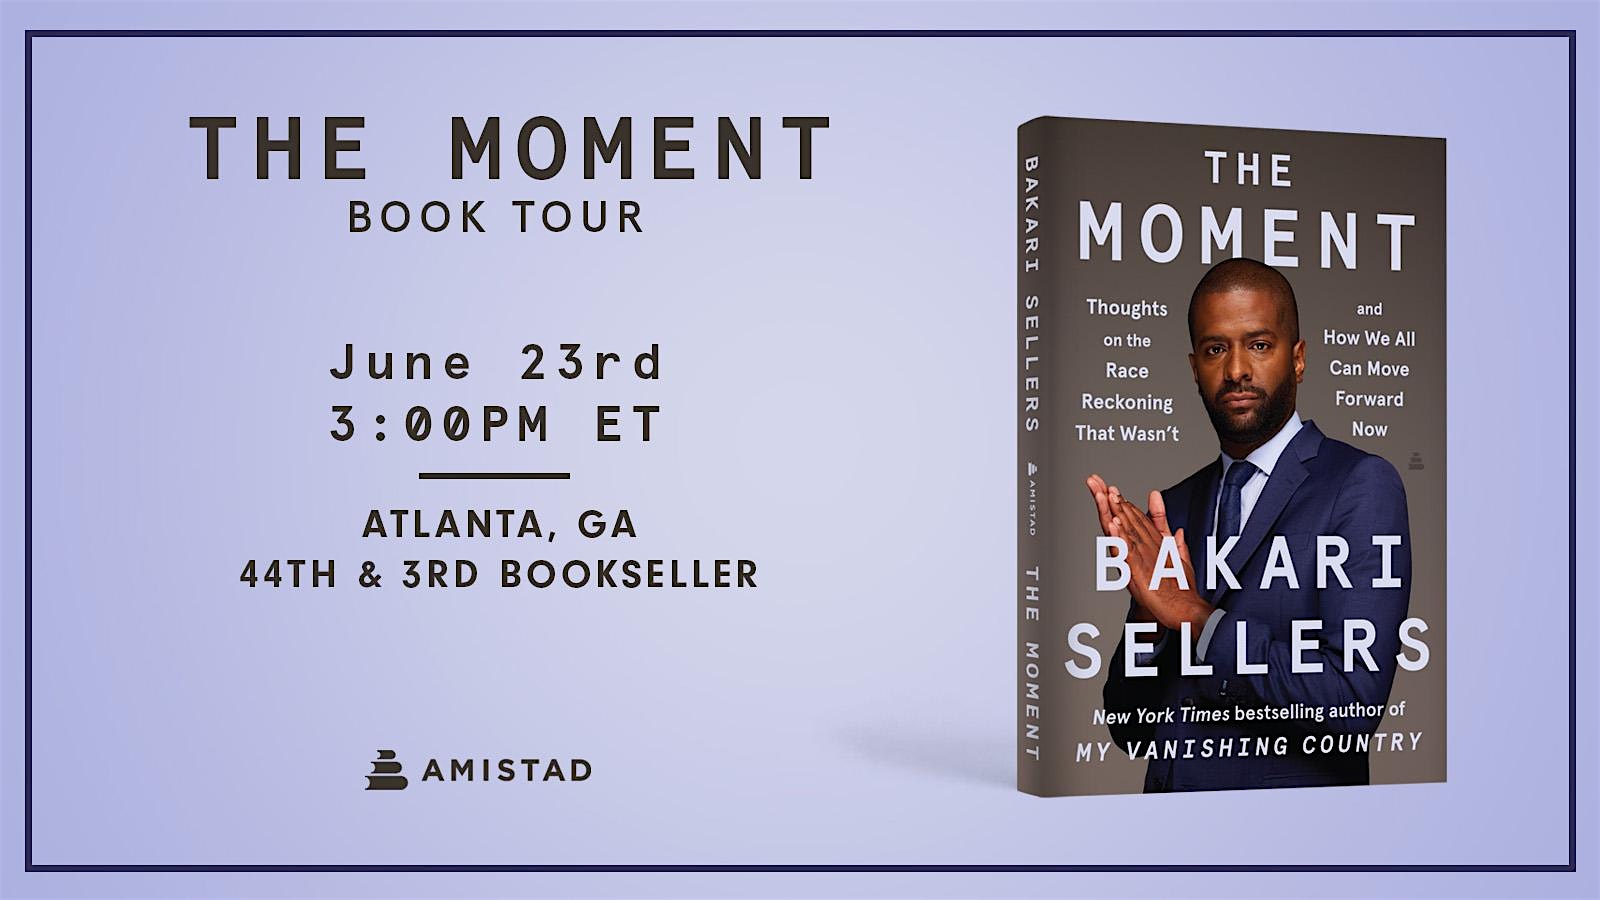 In conversation with Bakari Sellers author of The Moment